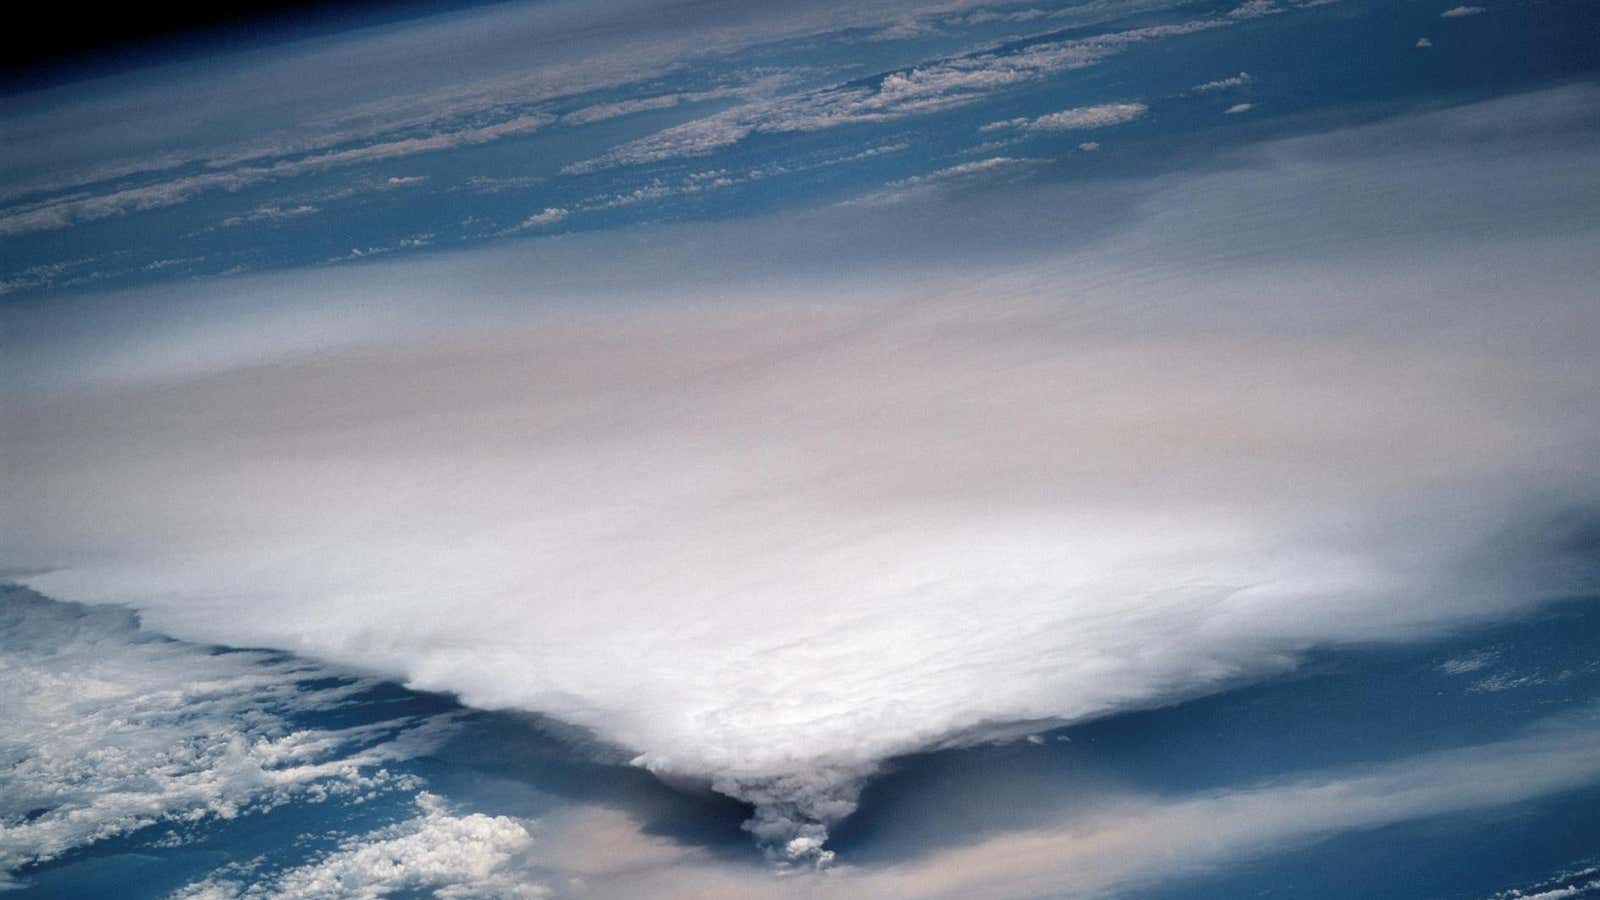 An ash cloud visible from space.